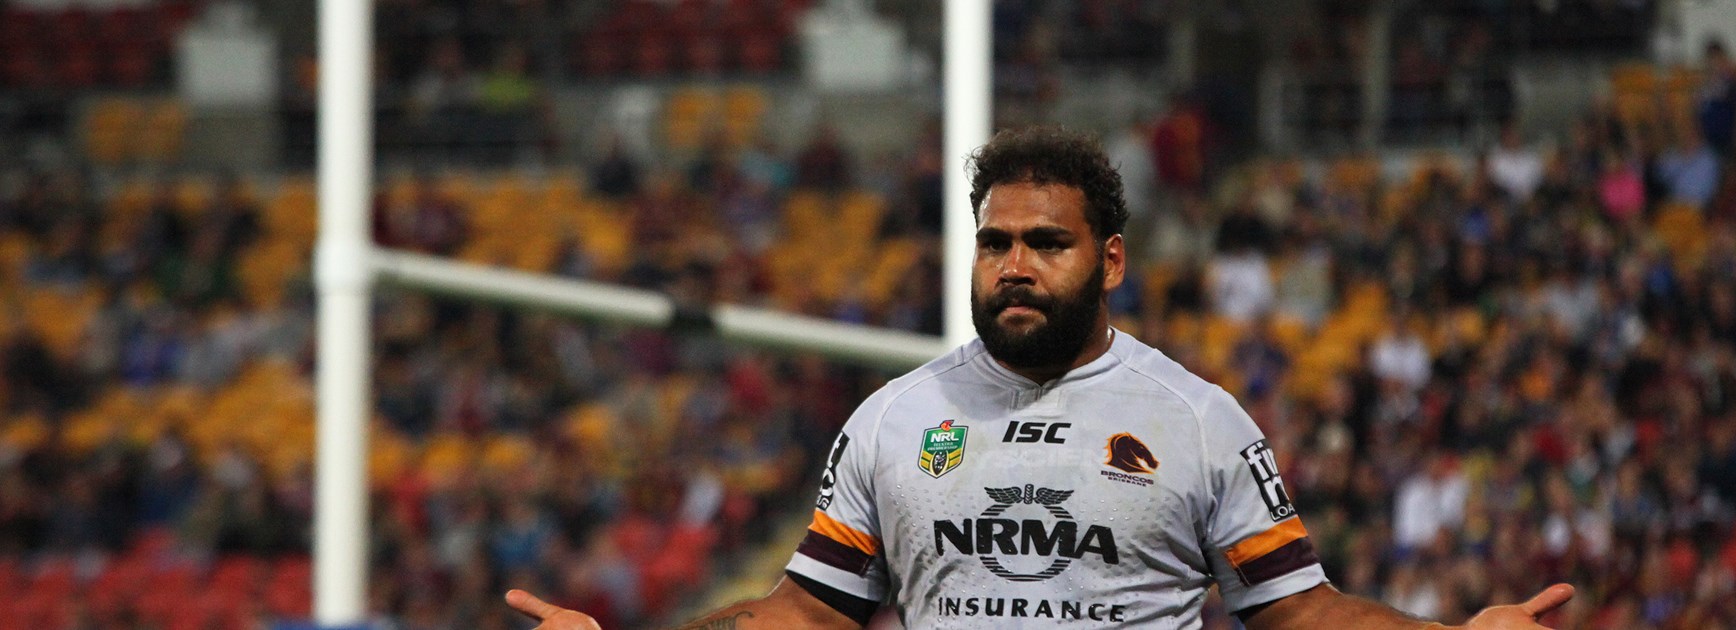 Broncos veteran Thaiday aims to go out a winner